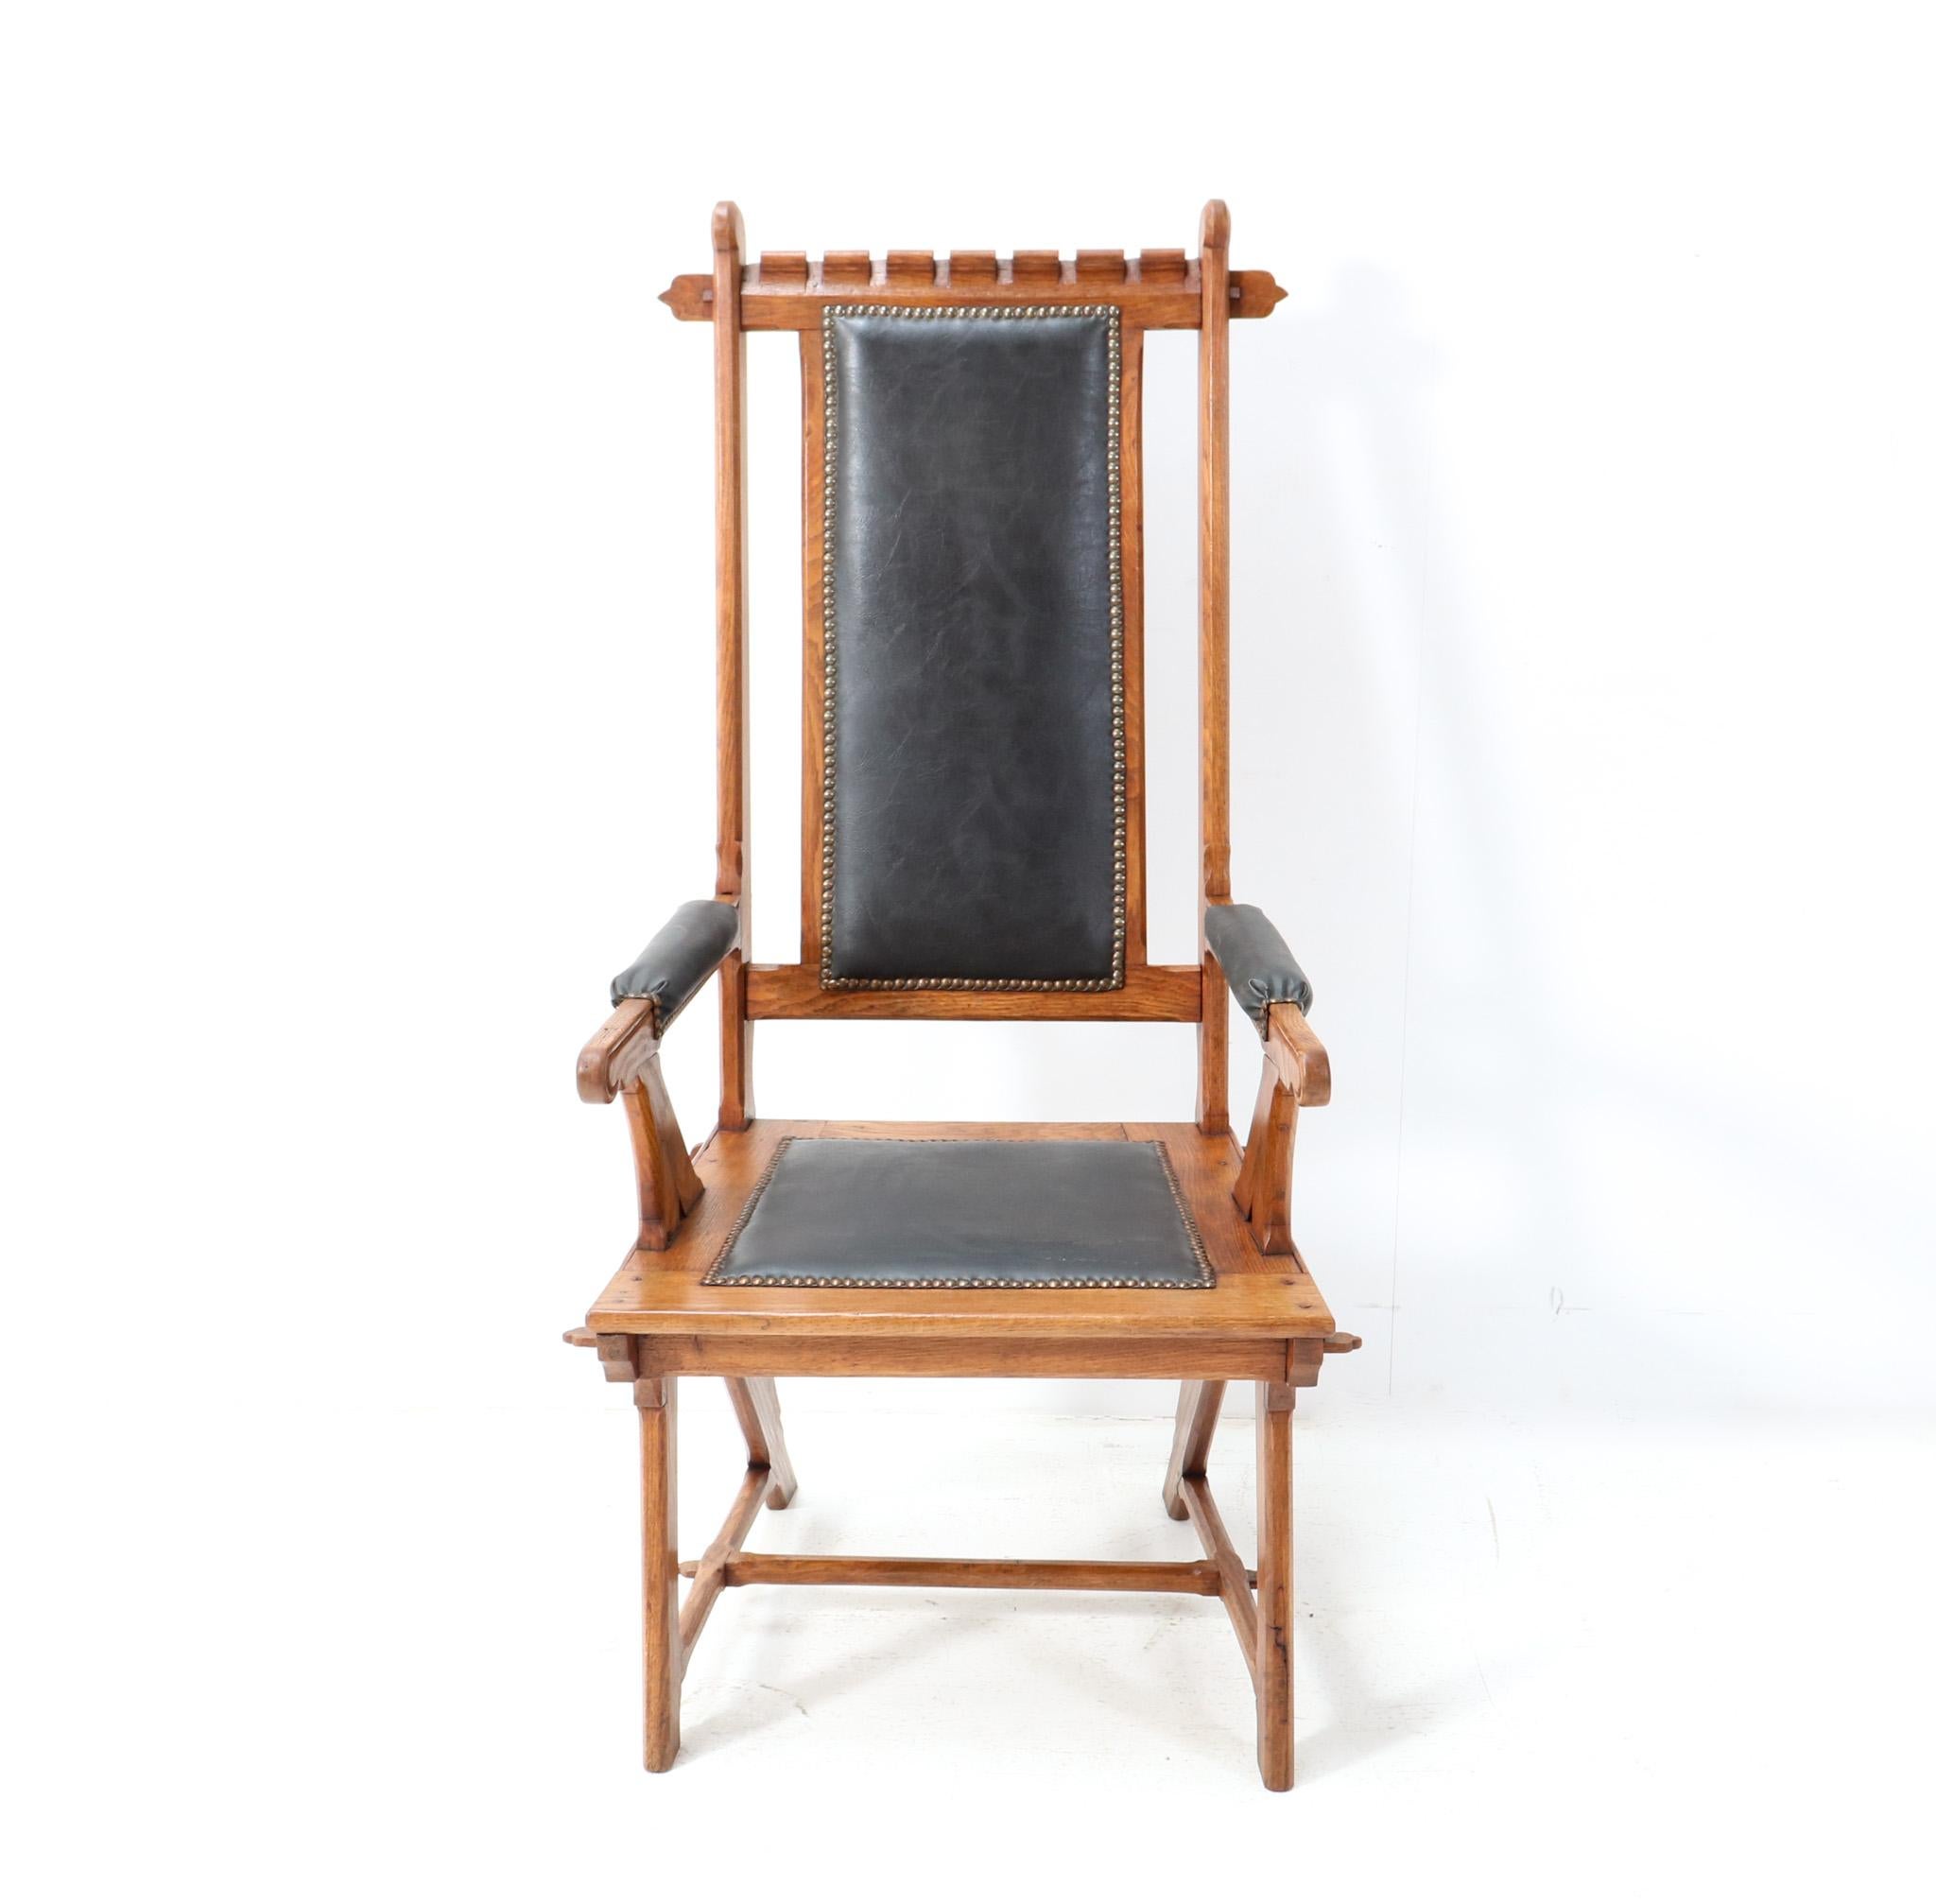 Magnificent and rare Arts & Crafts Art Nouveau high back armchair.
Design attributed to H.P. Berlage.
Solid oak frame with stylish carved elements.
Re-upholstered with brown faux leather.
The legs have the so-called A-construction which H.P.